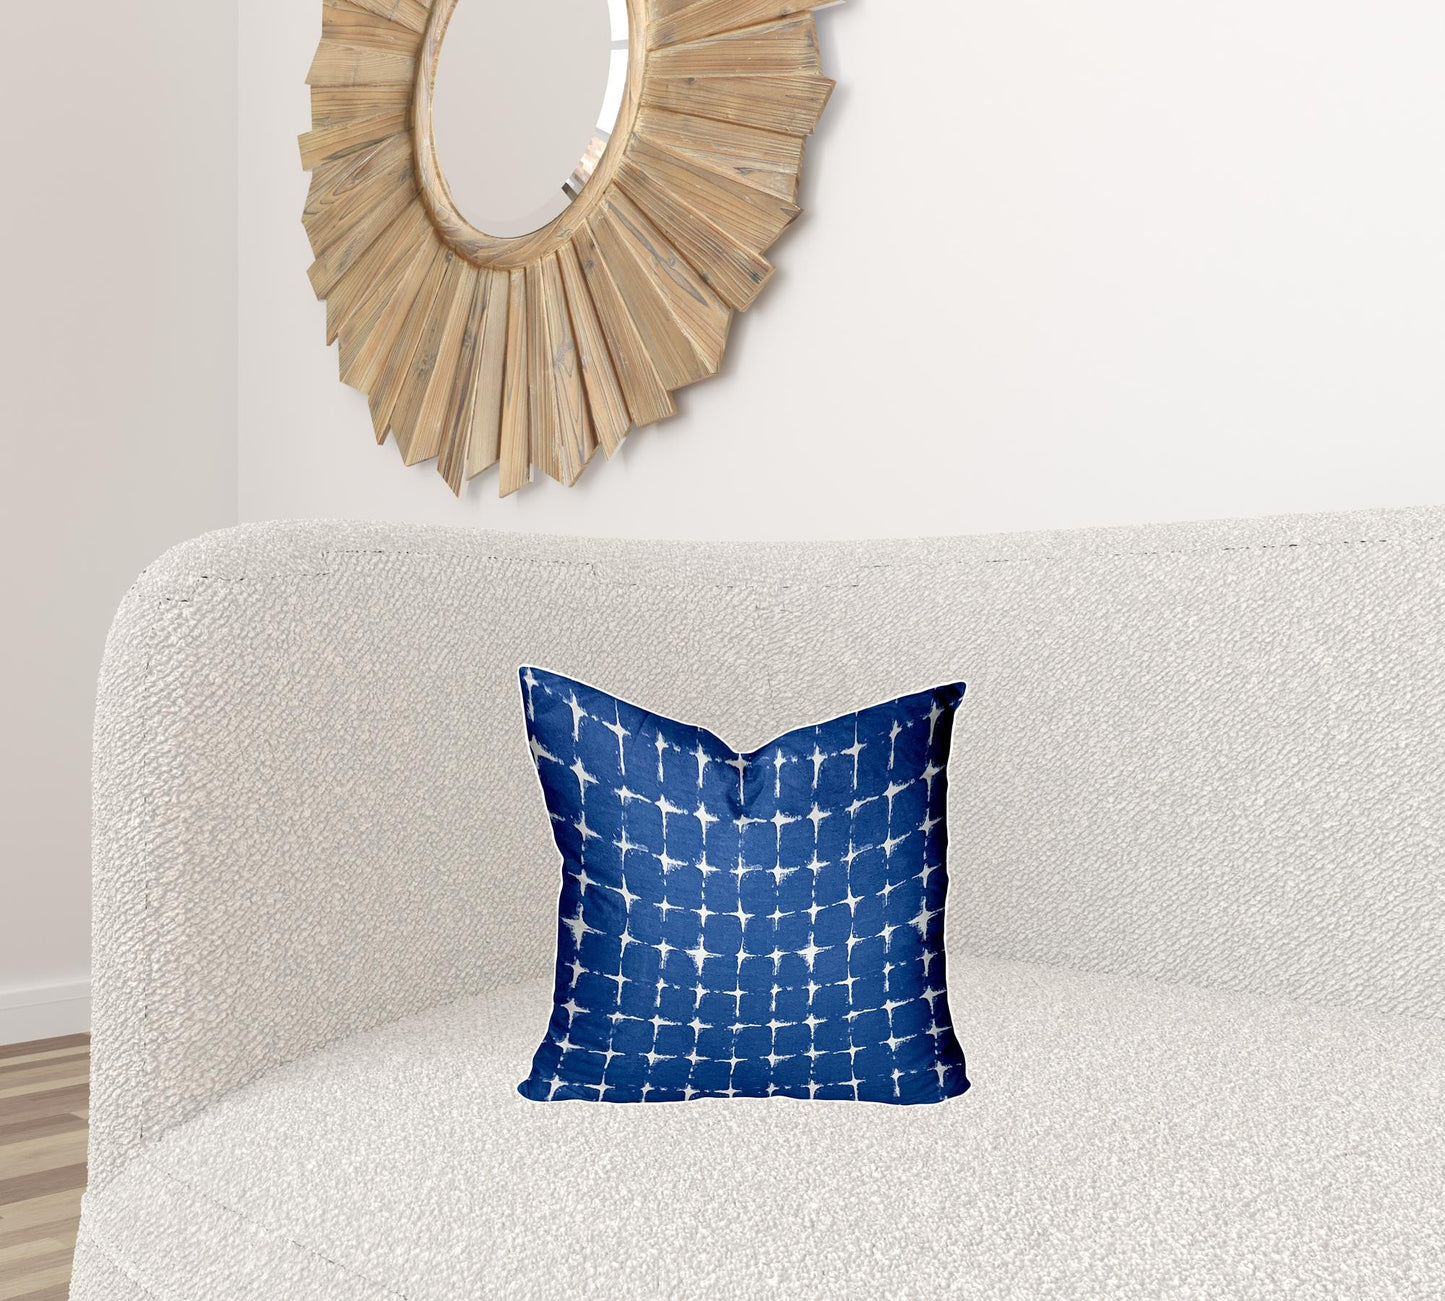 16" X 16" Blue And White Enveloped Gingham Throw Indoor Outdoor Pillow Cover